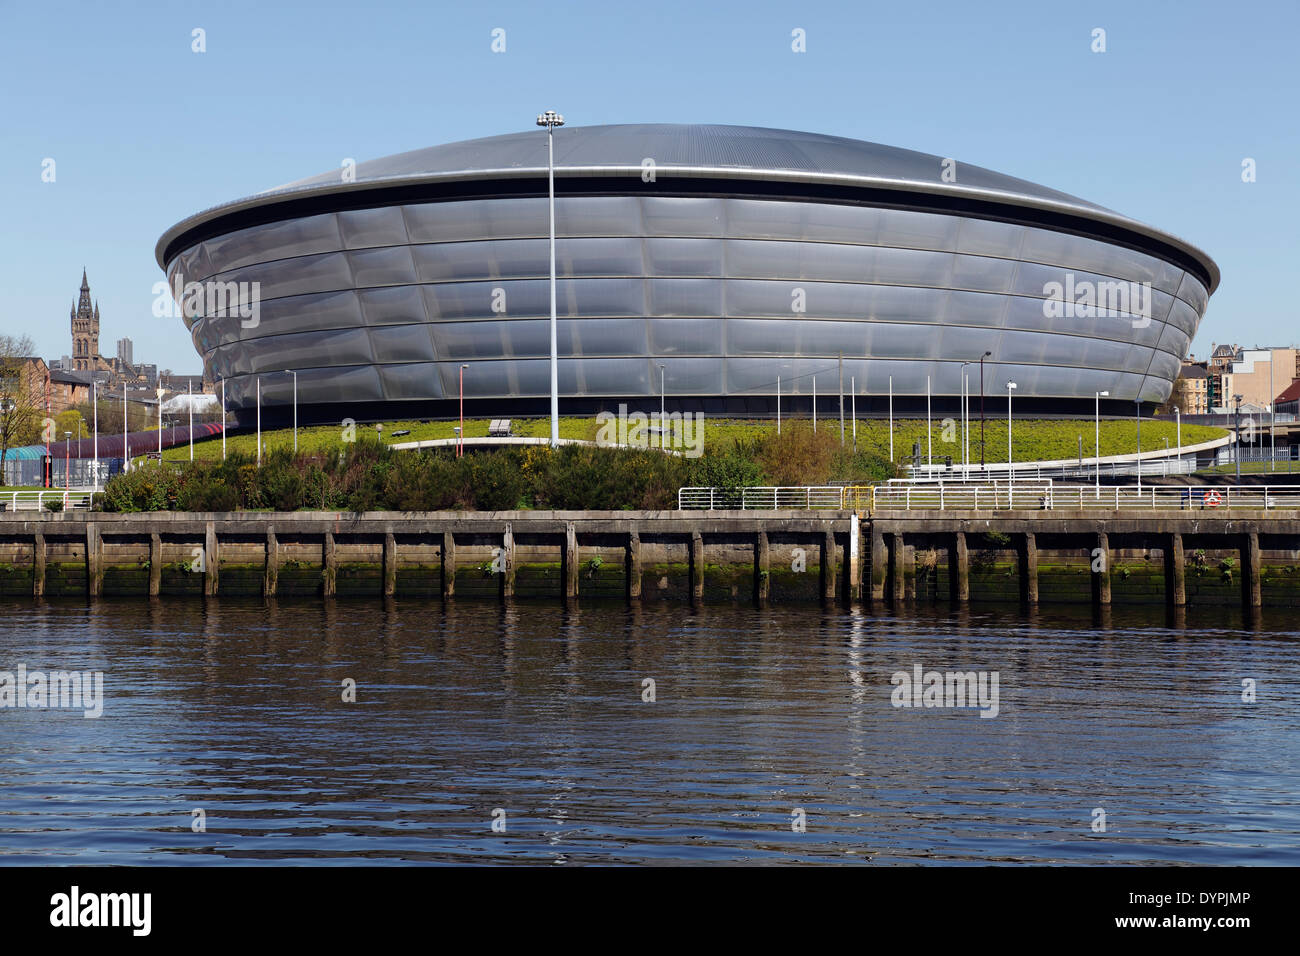 The SSE Hydro Arena on the SEC Centre in Glasgow, Scotland, UK Stock Photo